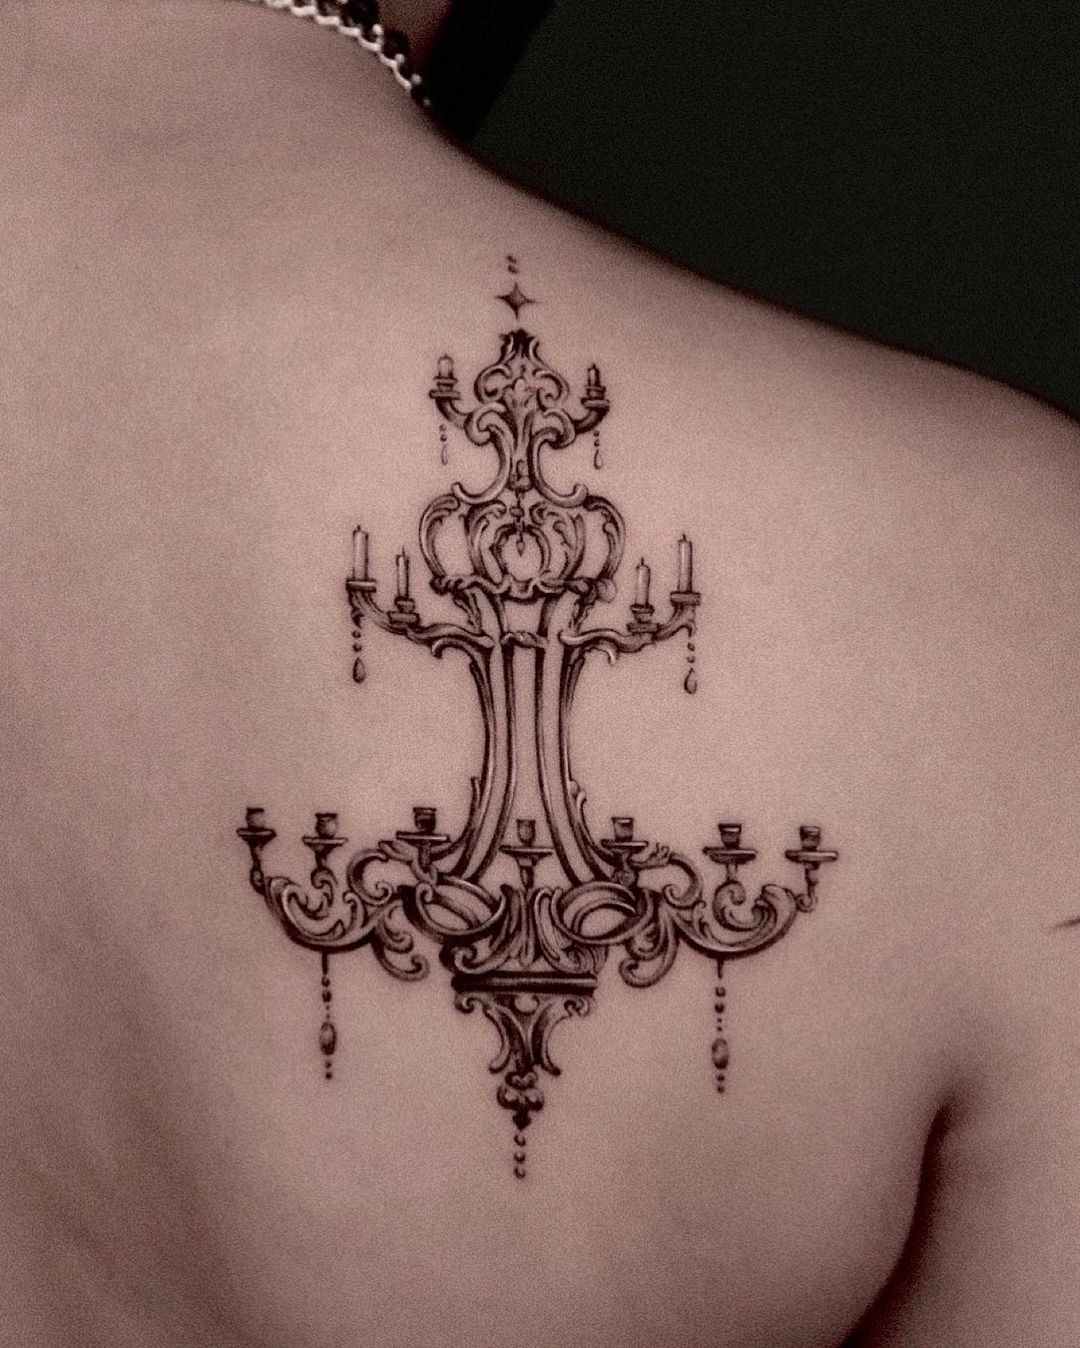 Top 20 chandelier tattoos that will knock your socks off!